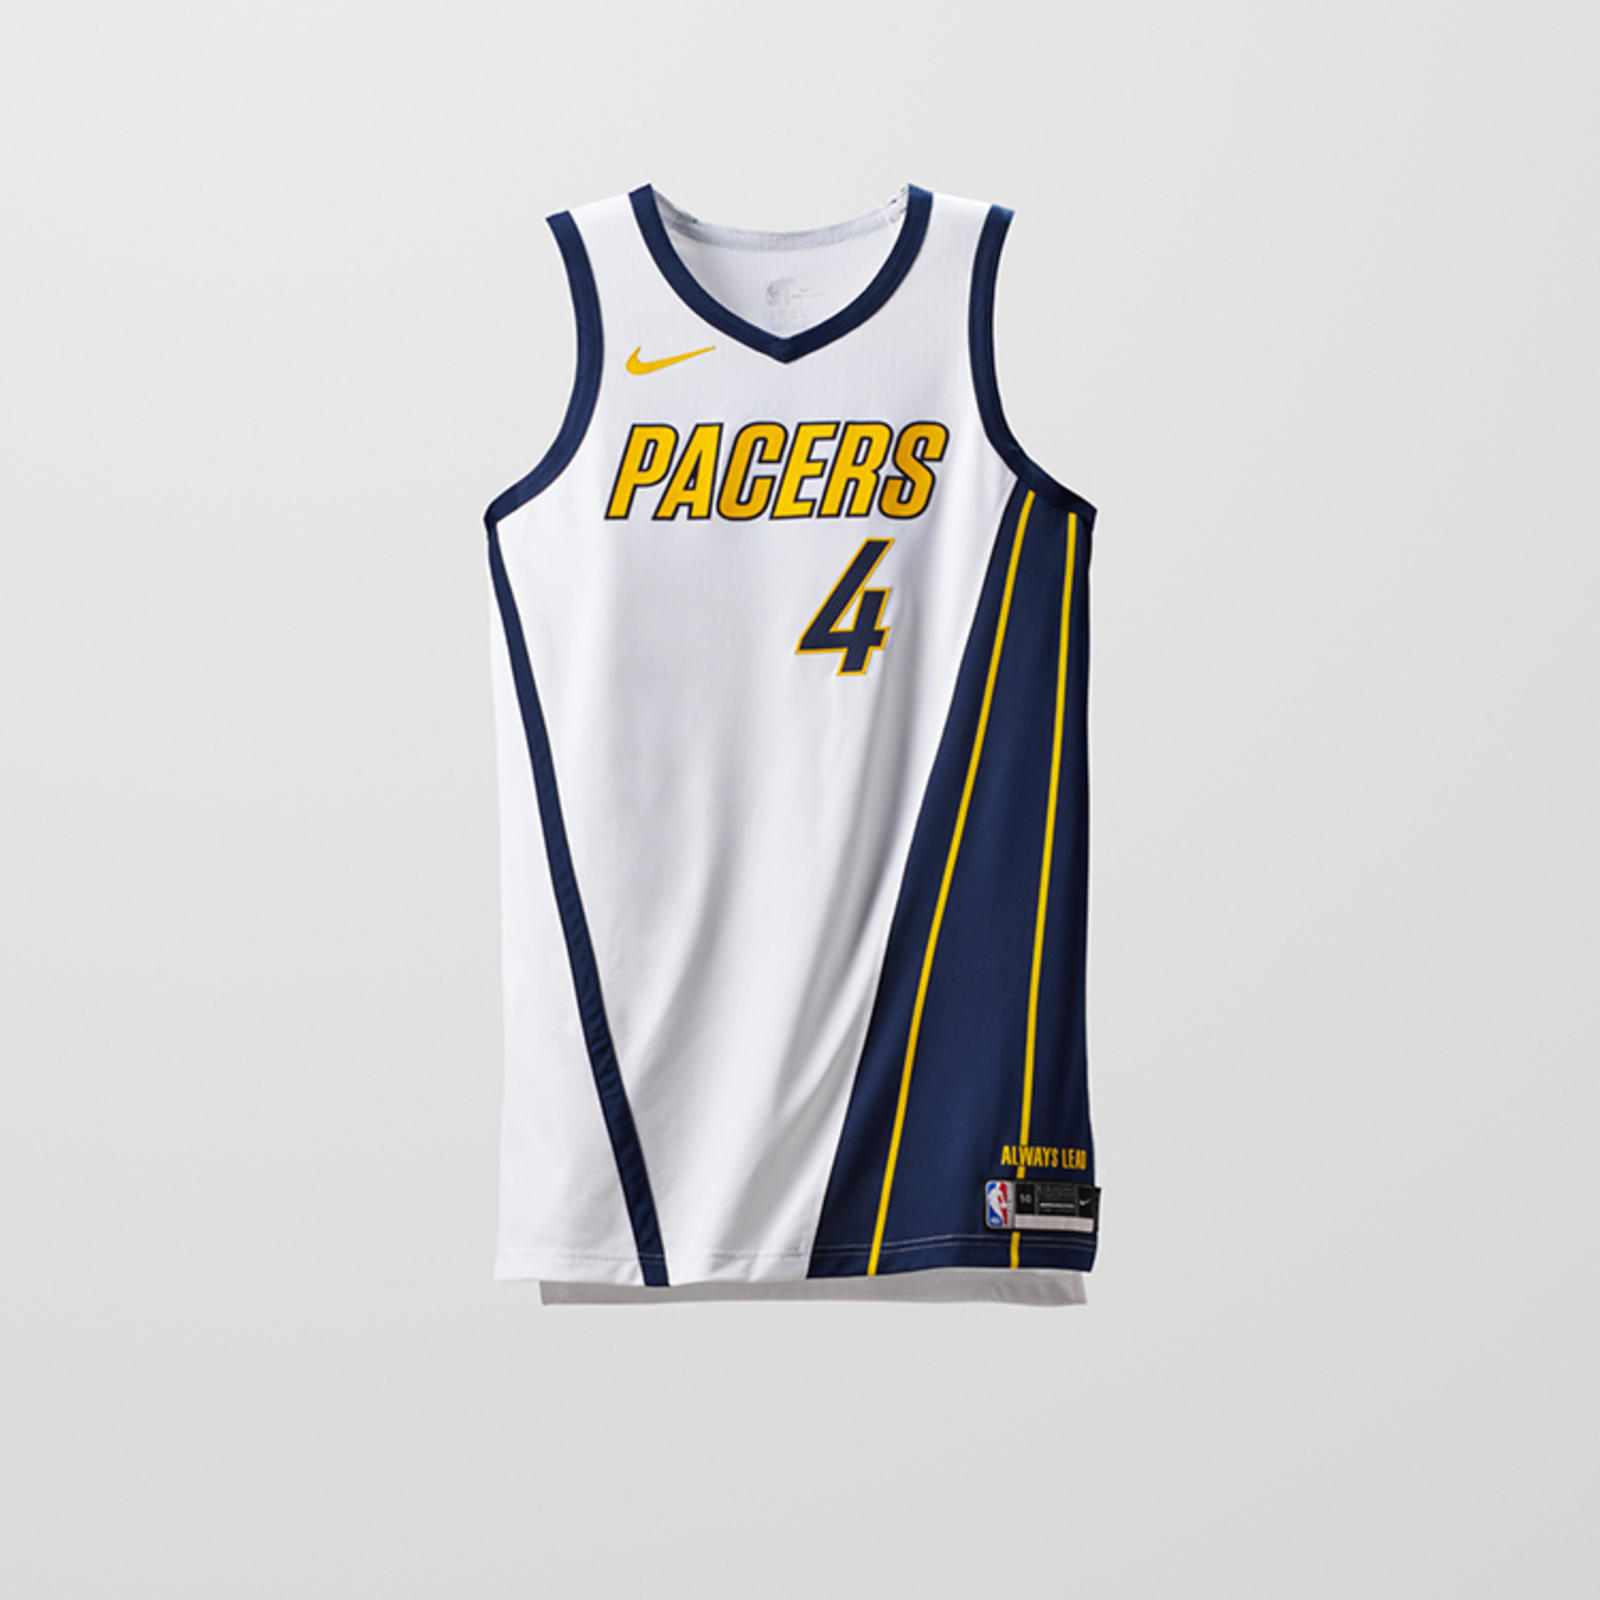 EarnedEditionUniforms_Pacers_straight_square_1600.jpg